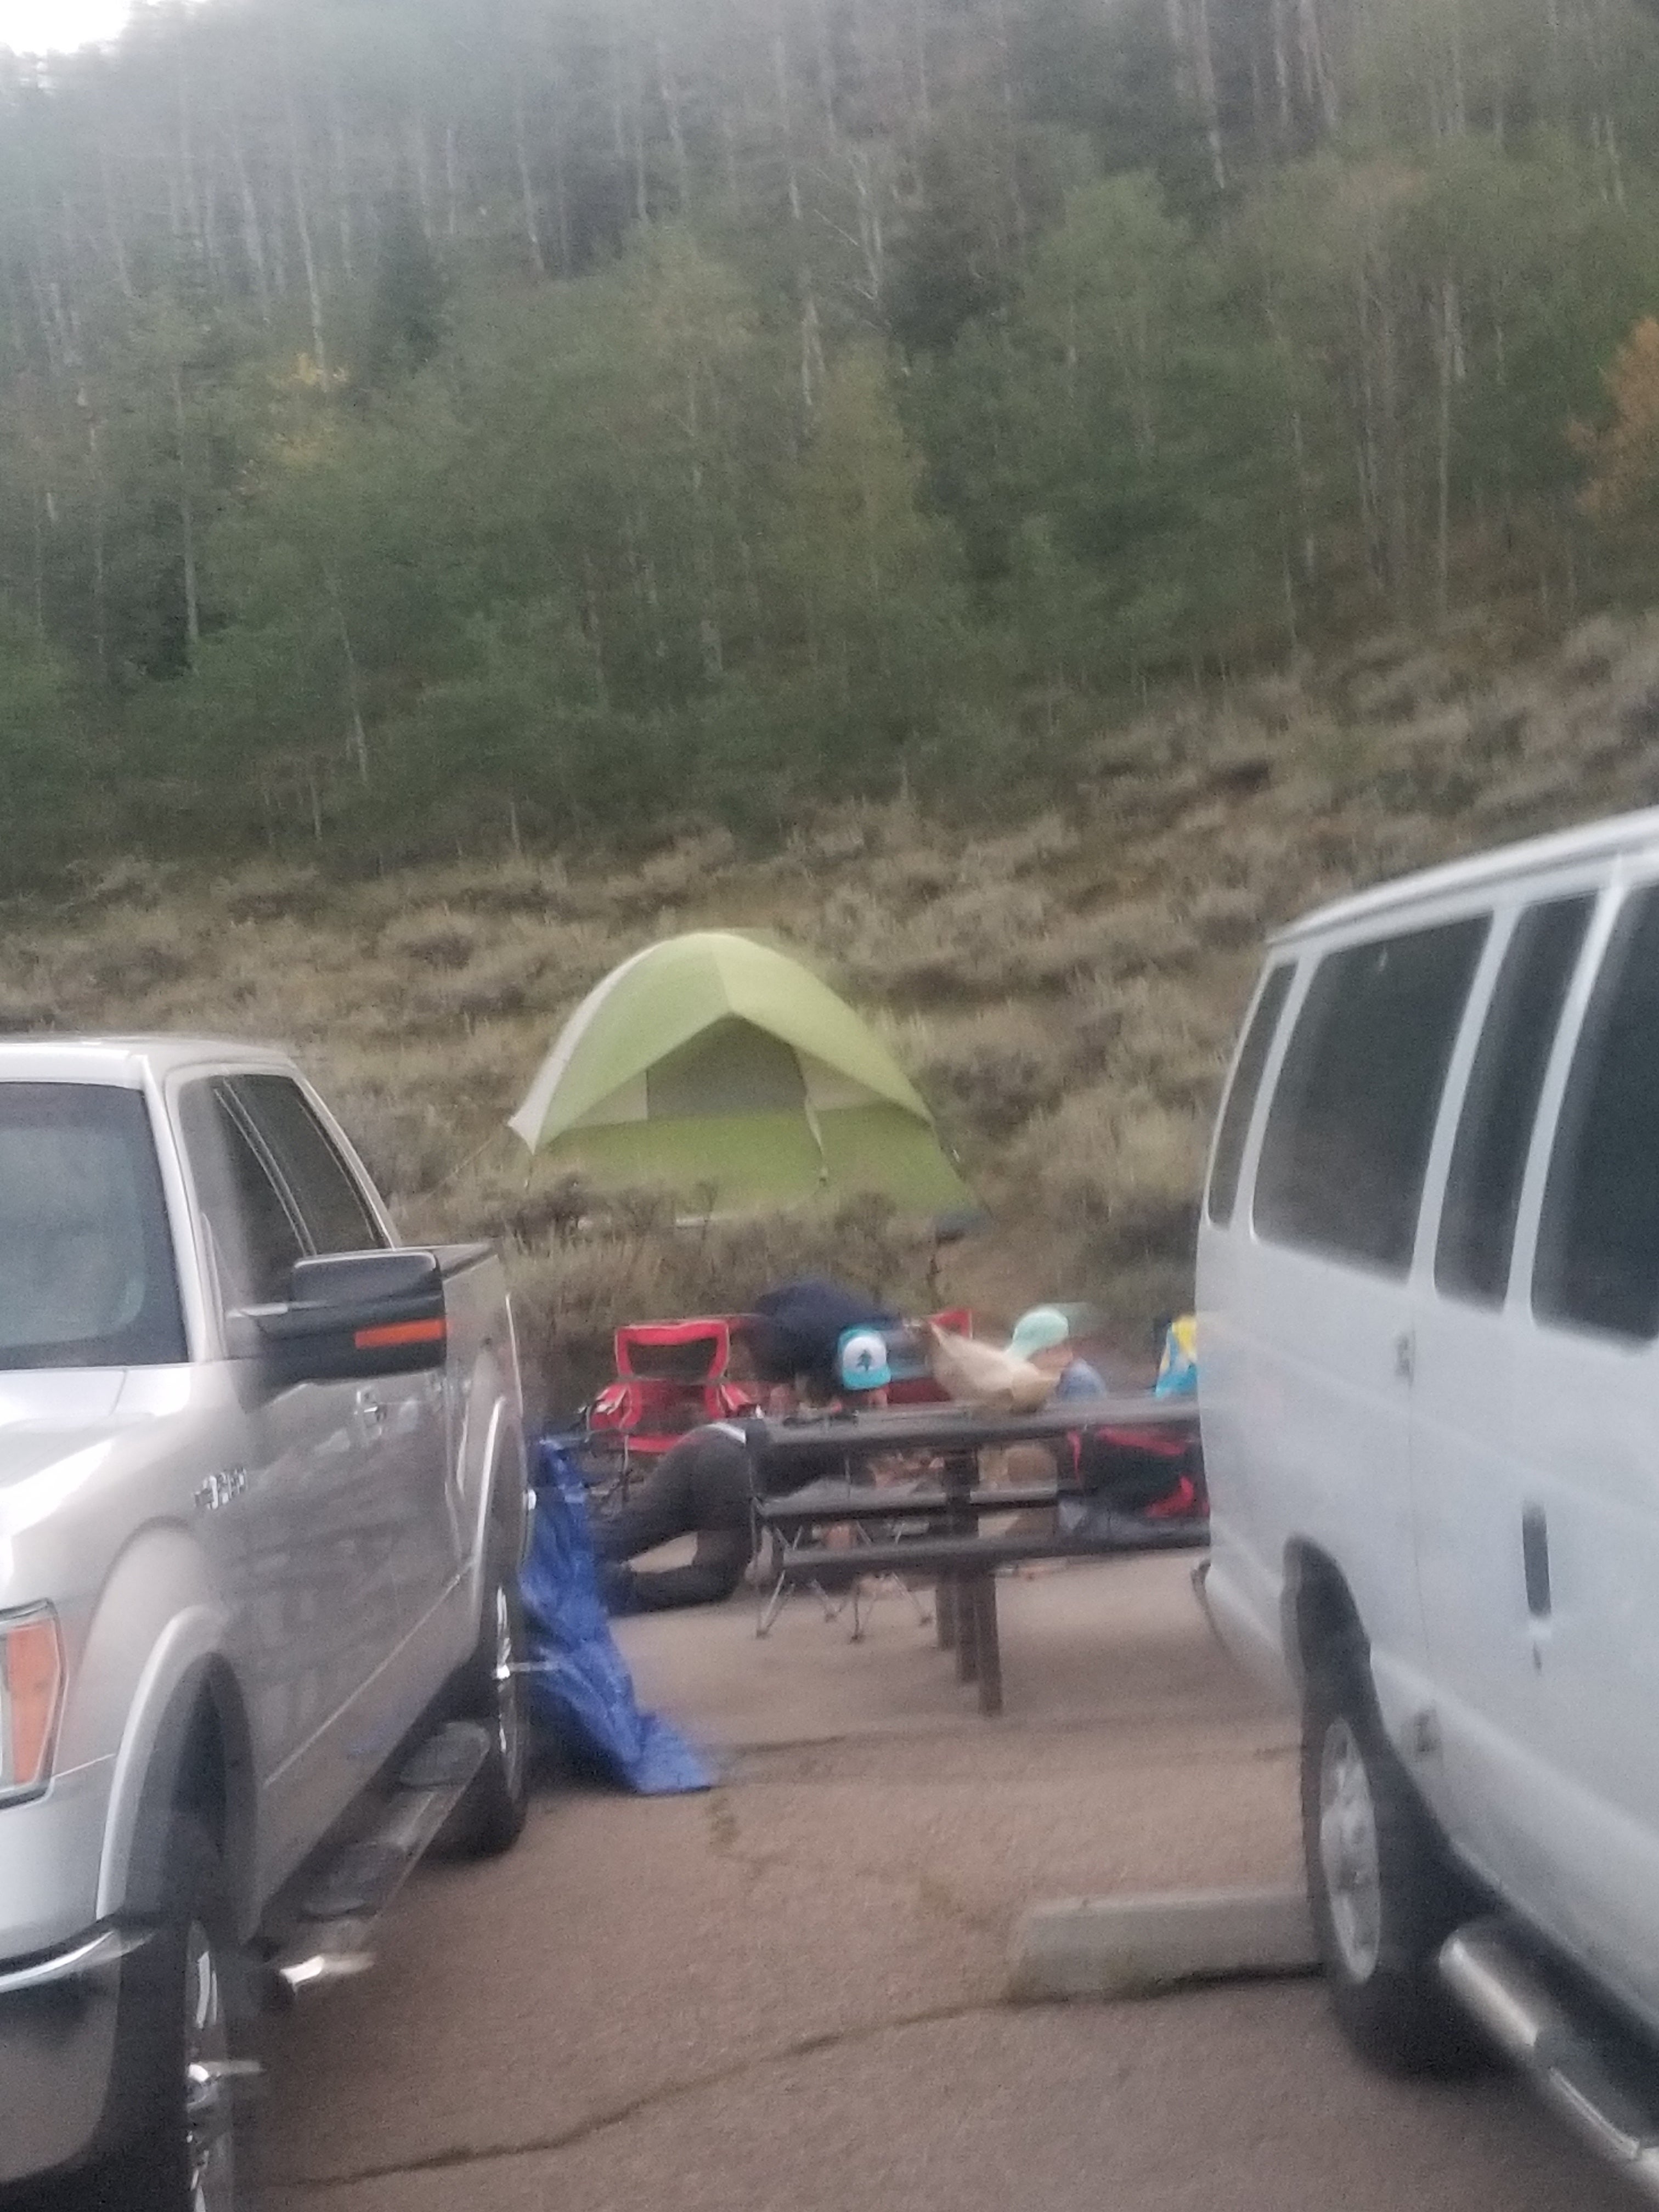 Camper submitted image from Aspen Grove (uinta-wasatch-cache National Forest, Ut) - 5